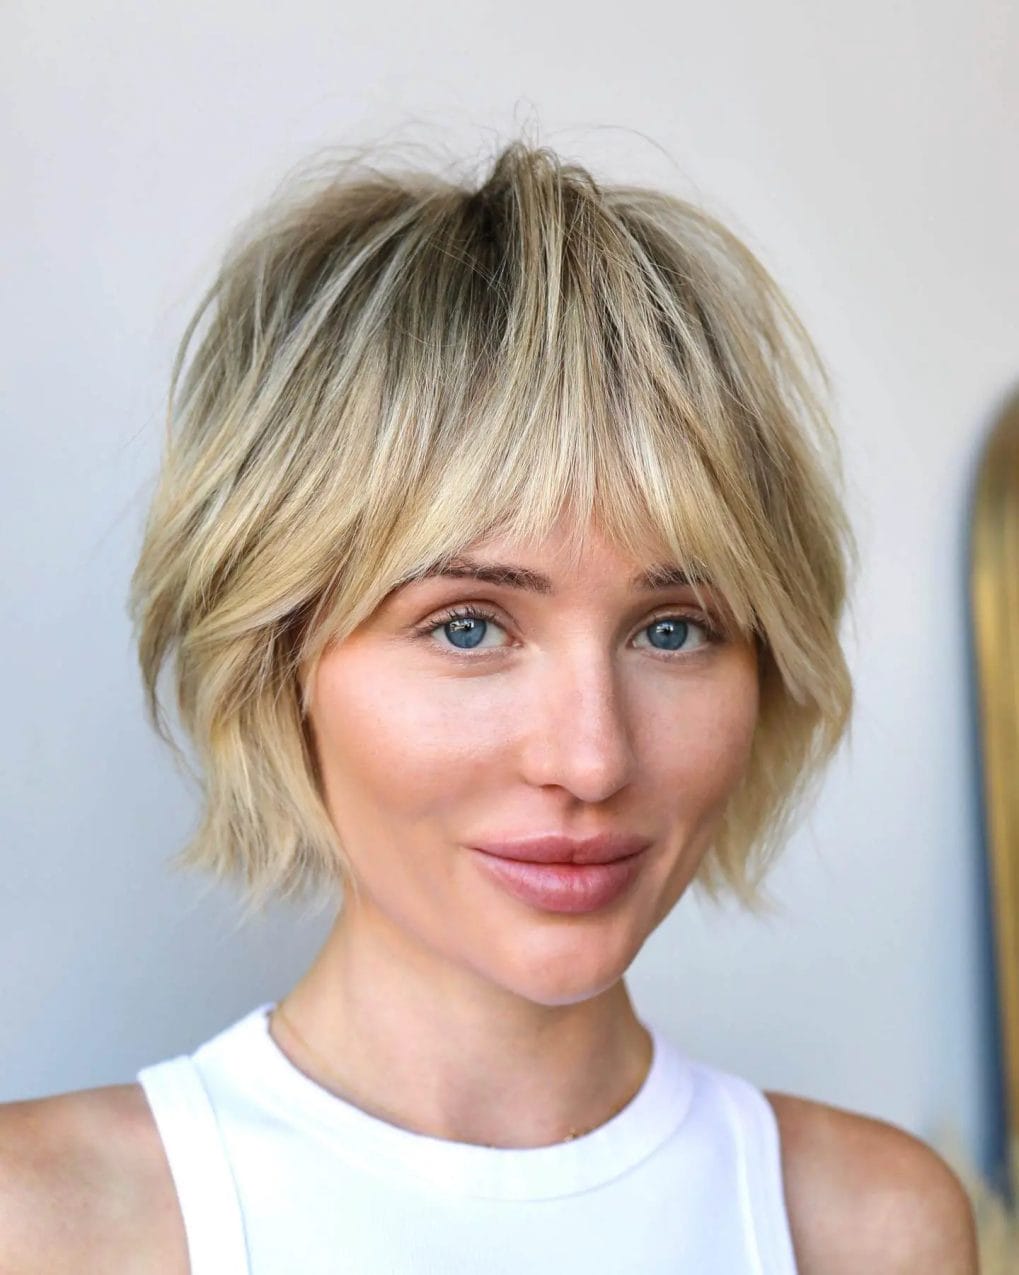 Short, choppy bob with dark roots, blonde highlights, and feathered curtain bangs.